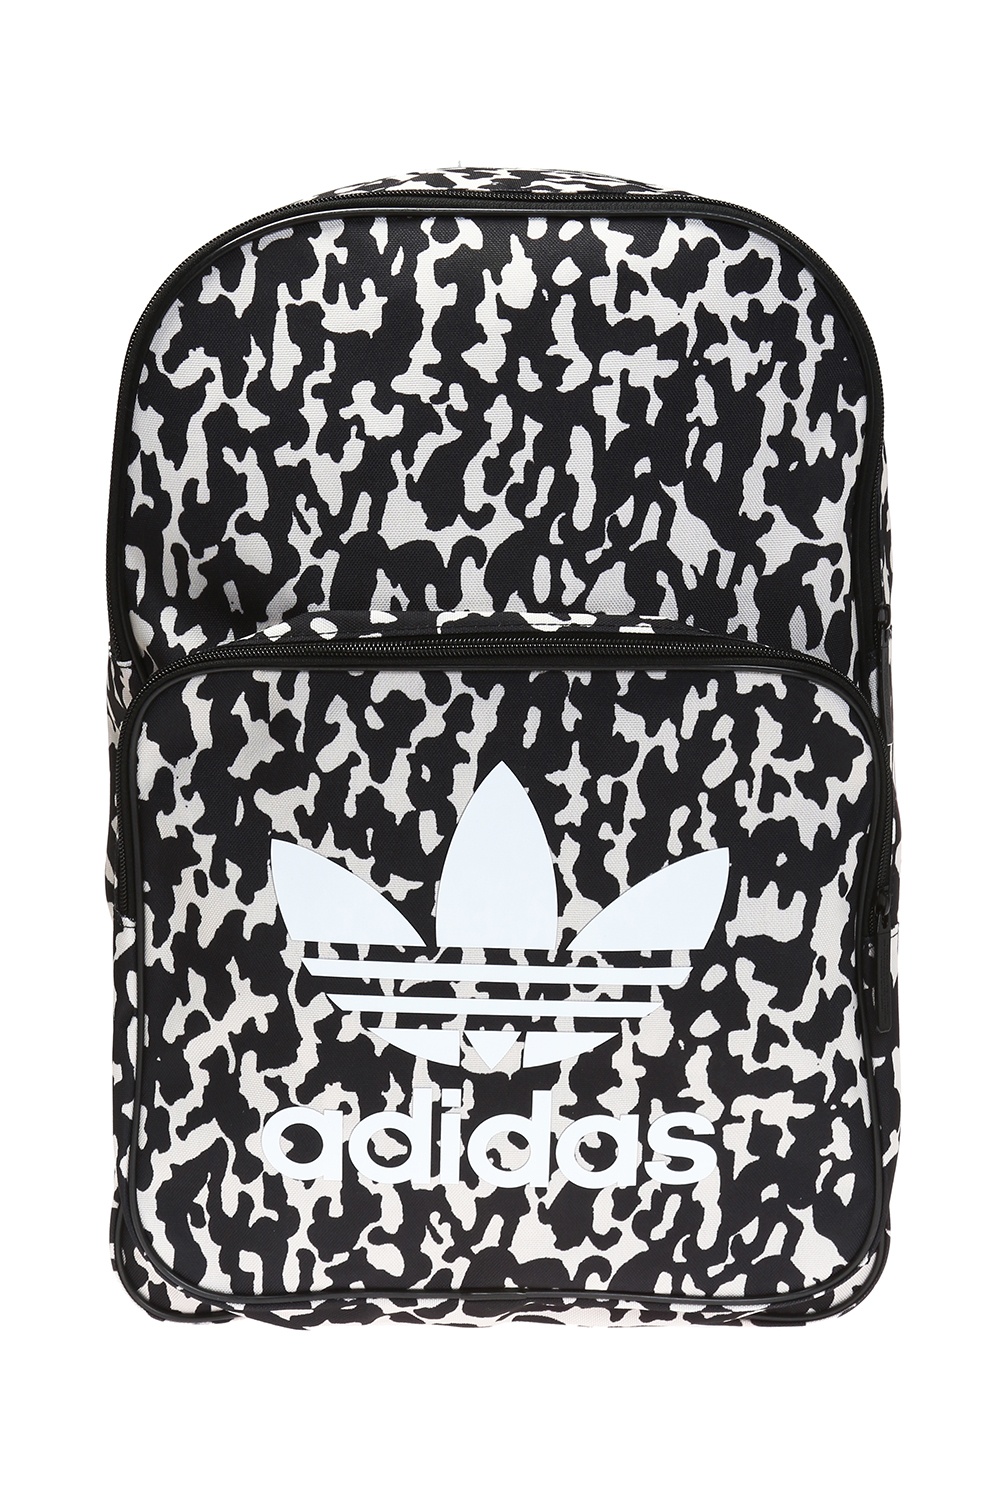 adidas patterned backpack